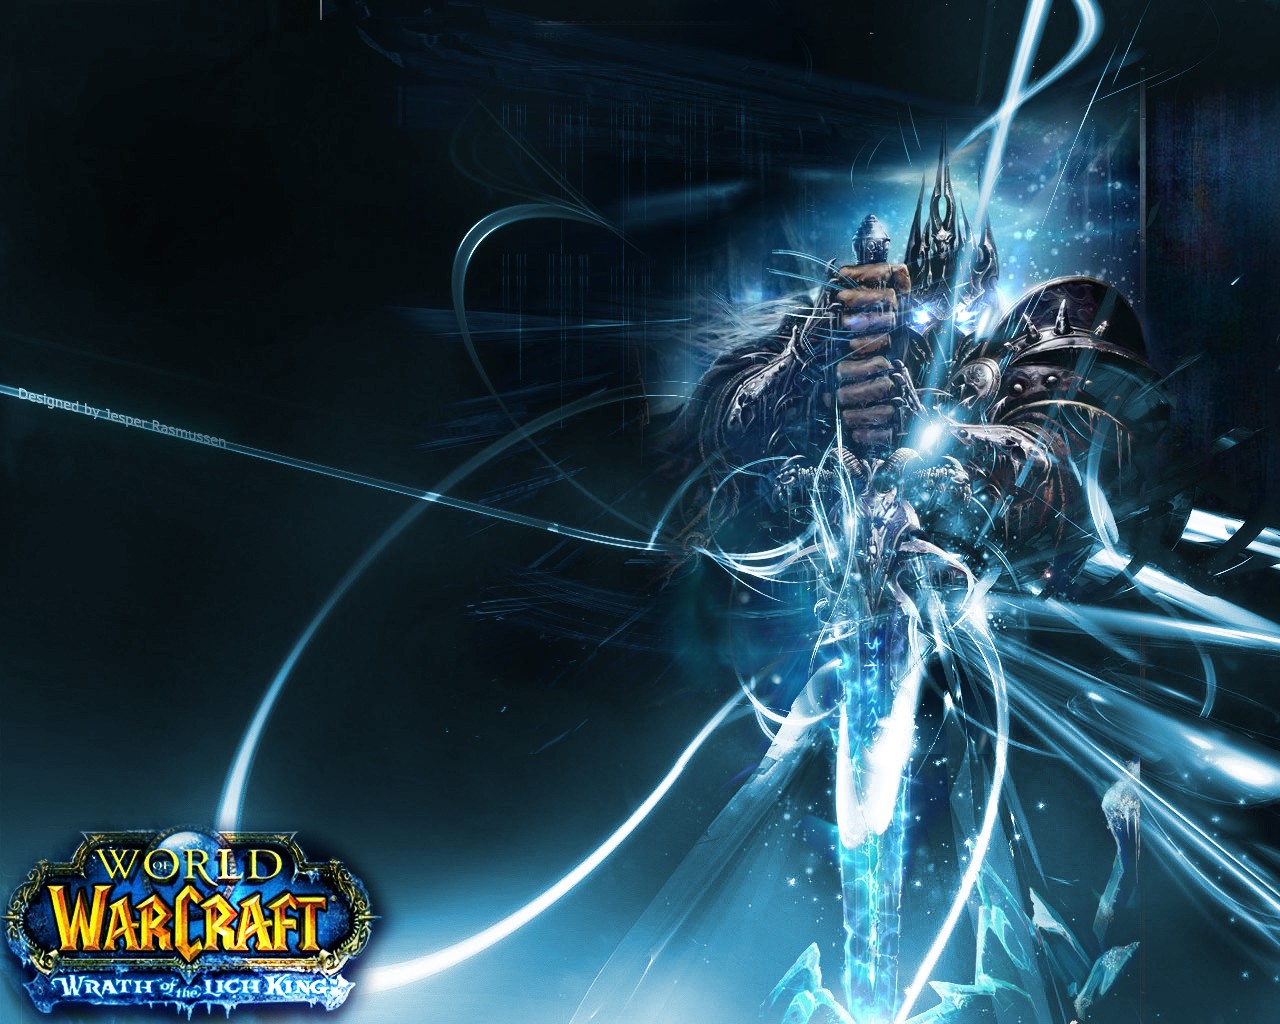 General 1280x1024 World of Warcraft World of Warcraft: Wrath of the Lich King video games Blizzard Entertainment PC gaming video game art